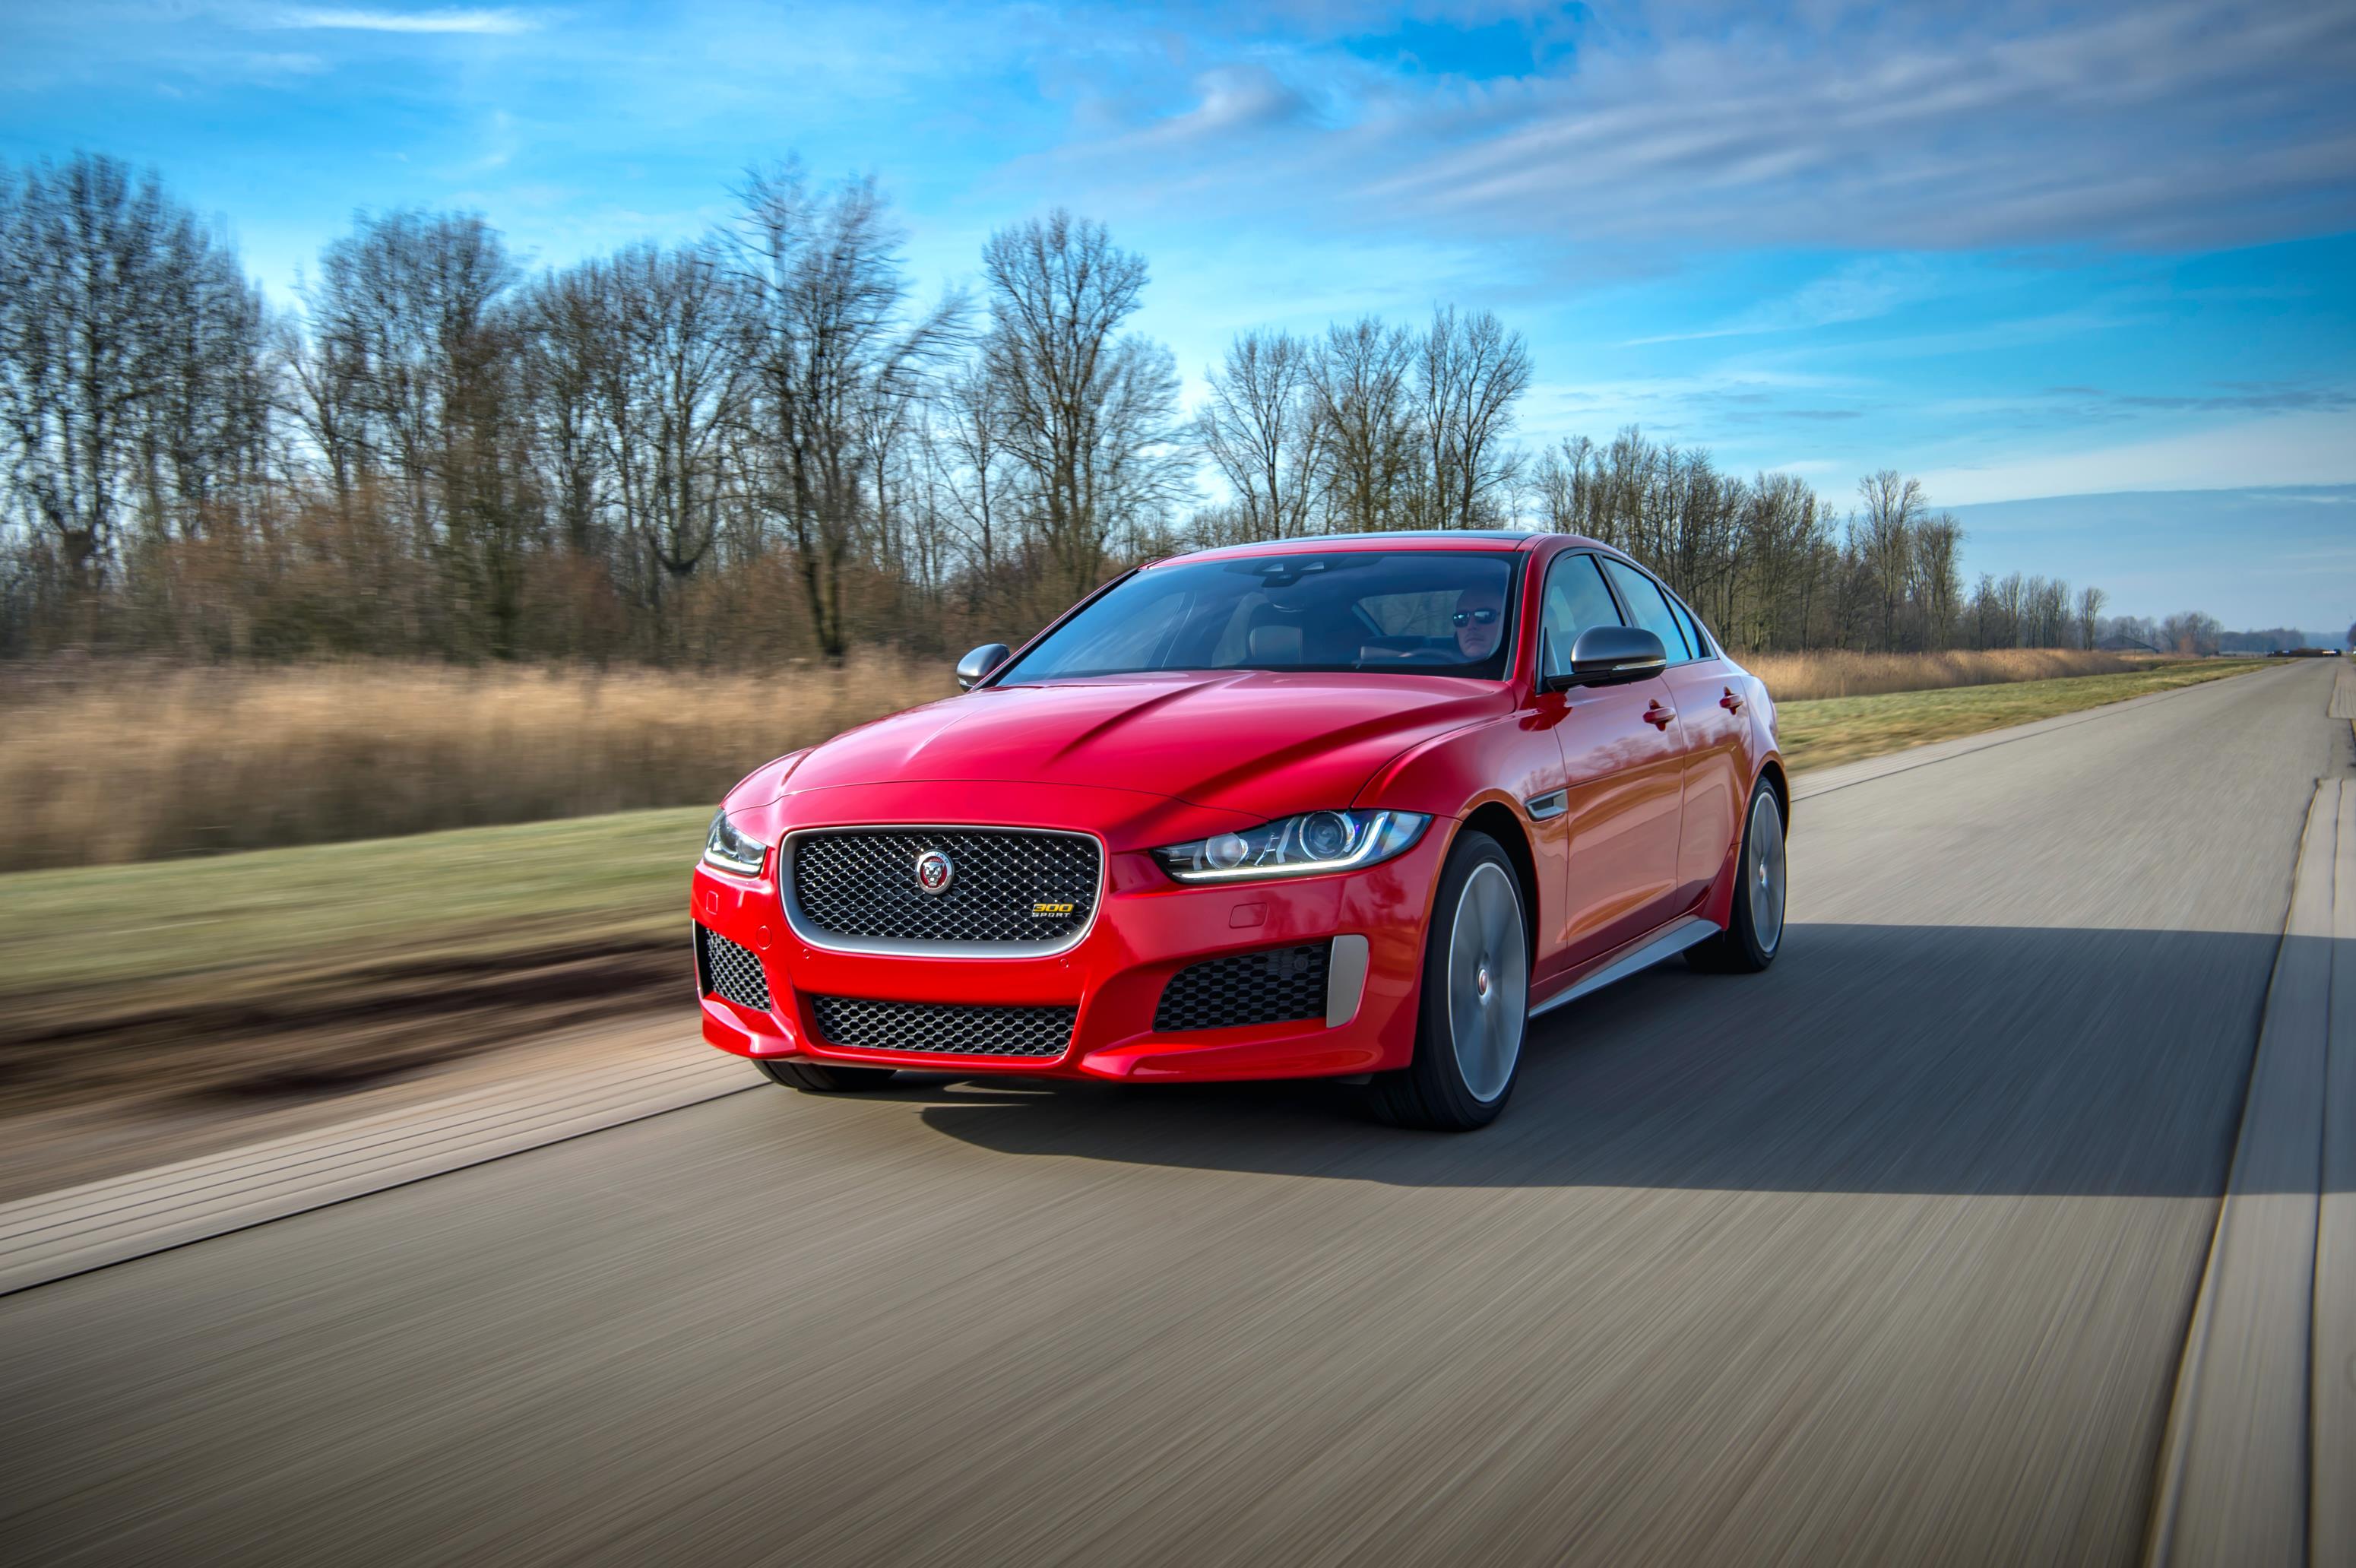 Red Jaguar XE driving towards you with a very blue sky